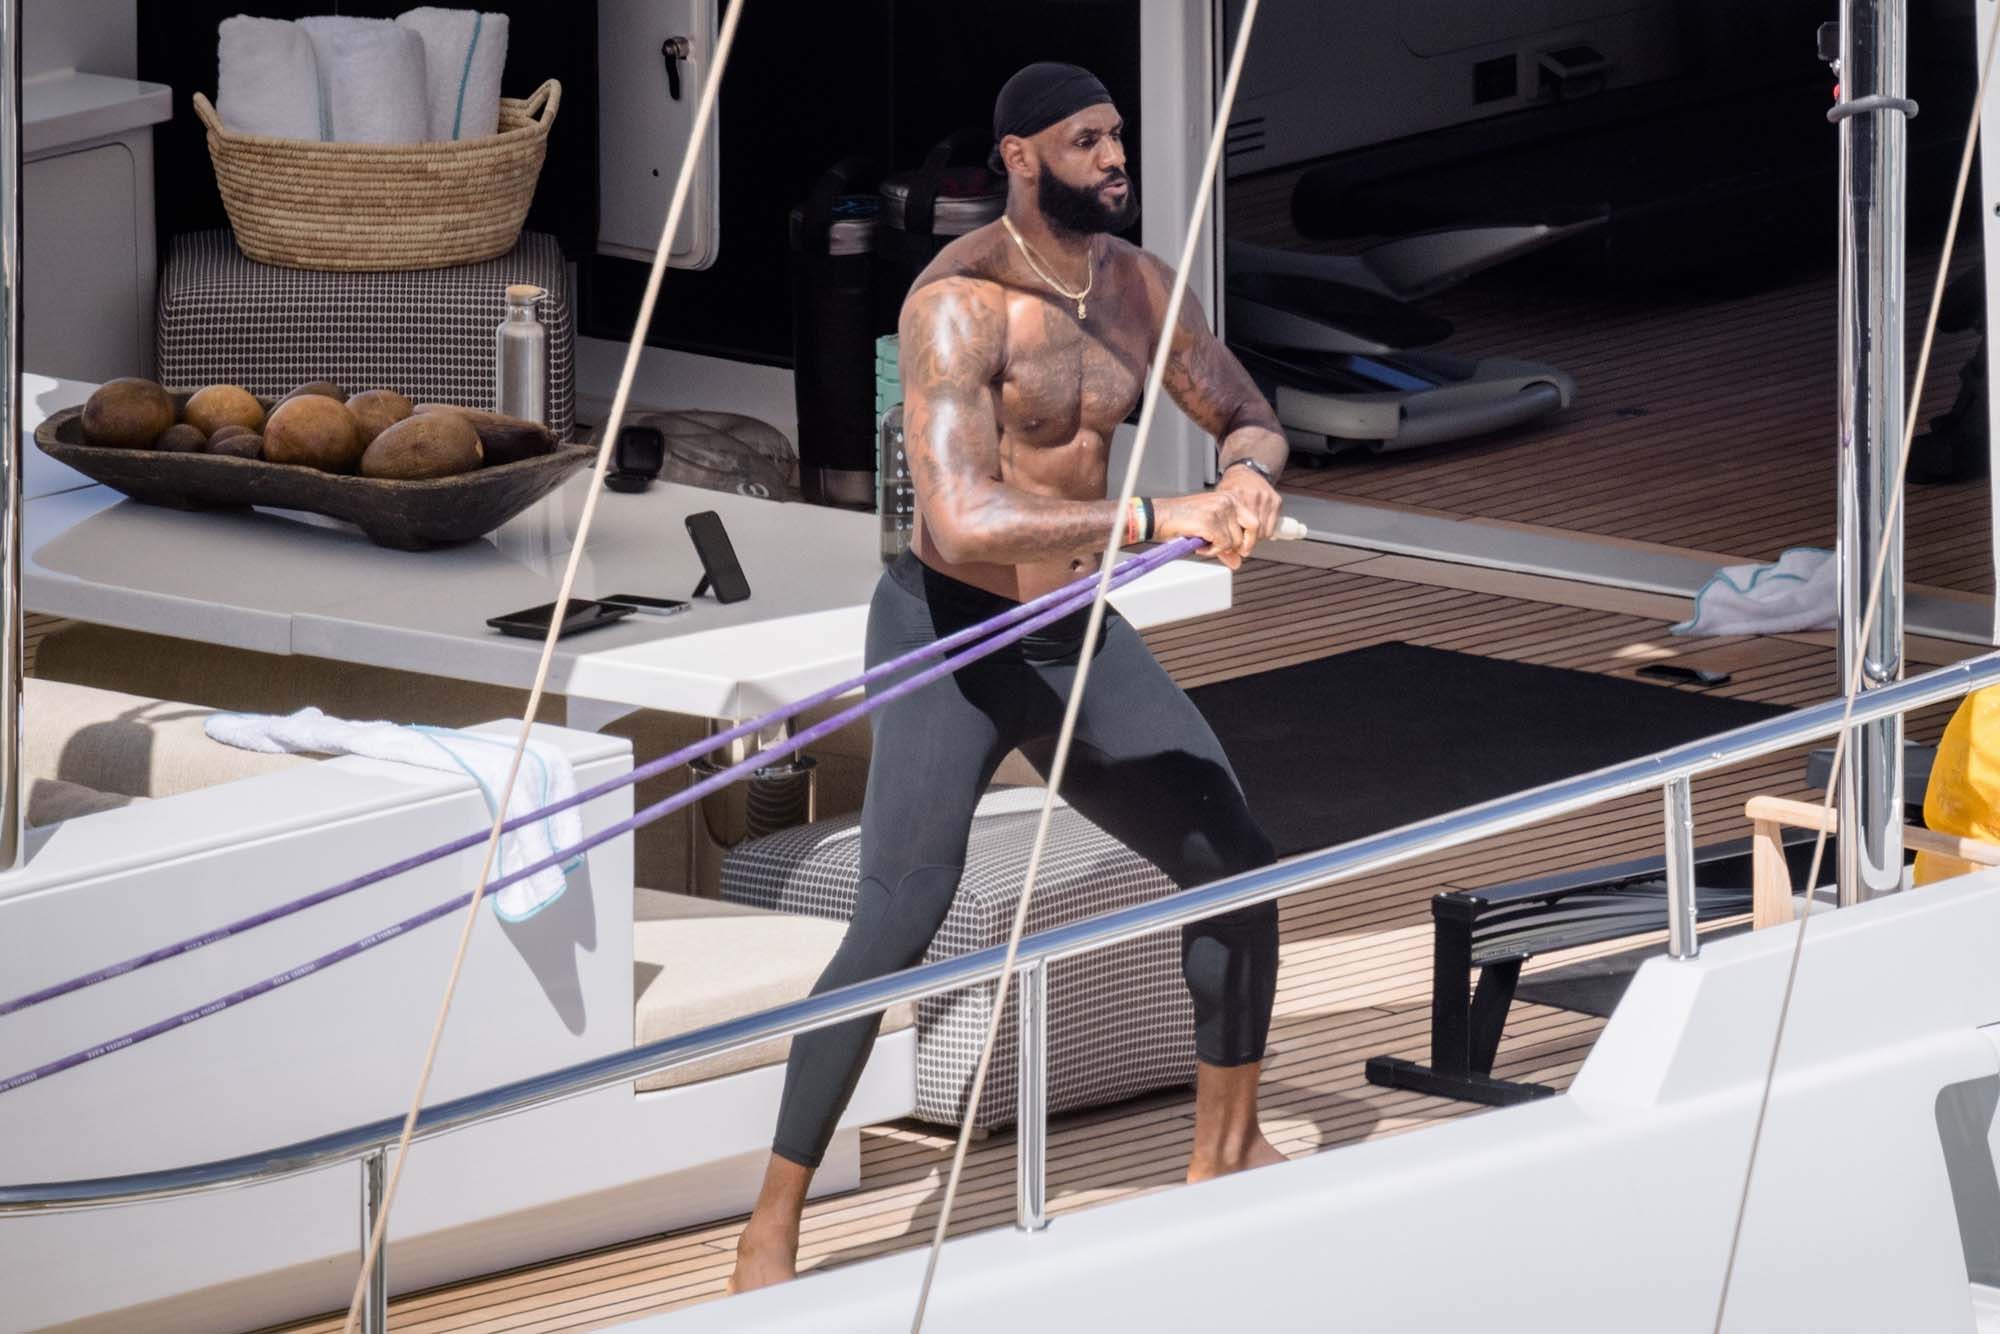 LeBron James works out in compression pants.